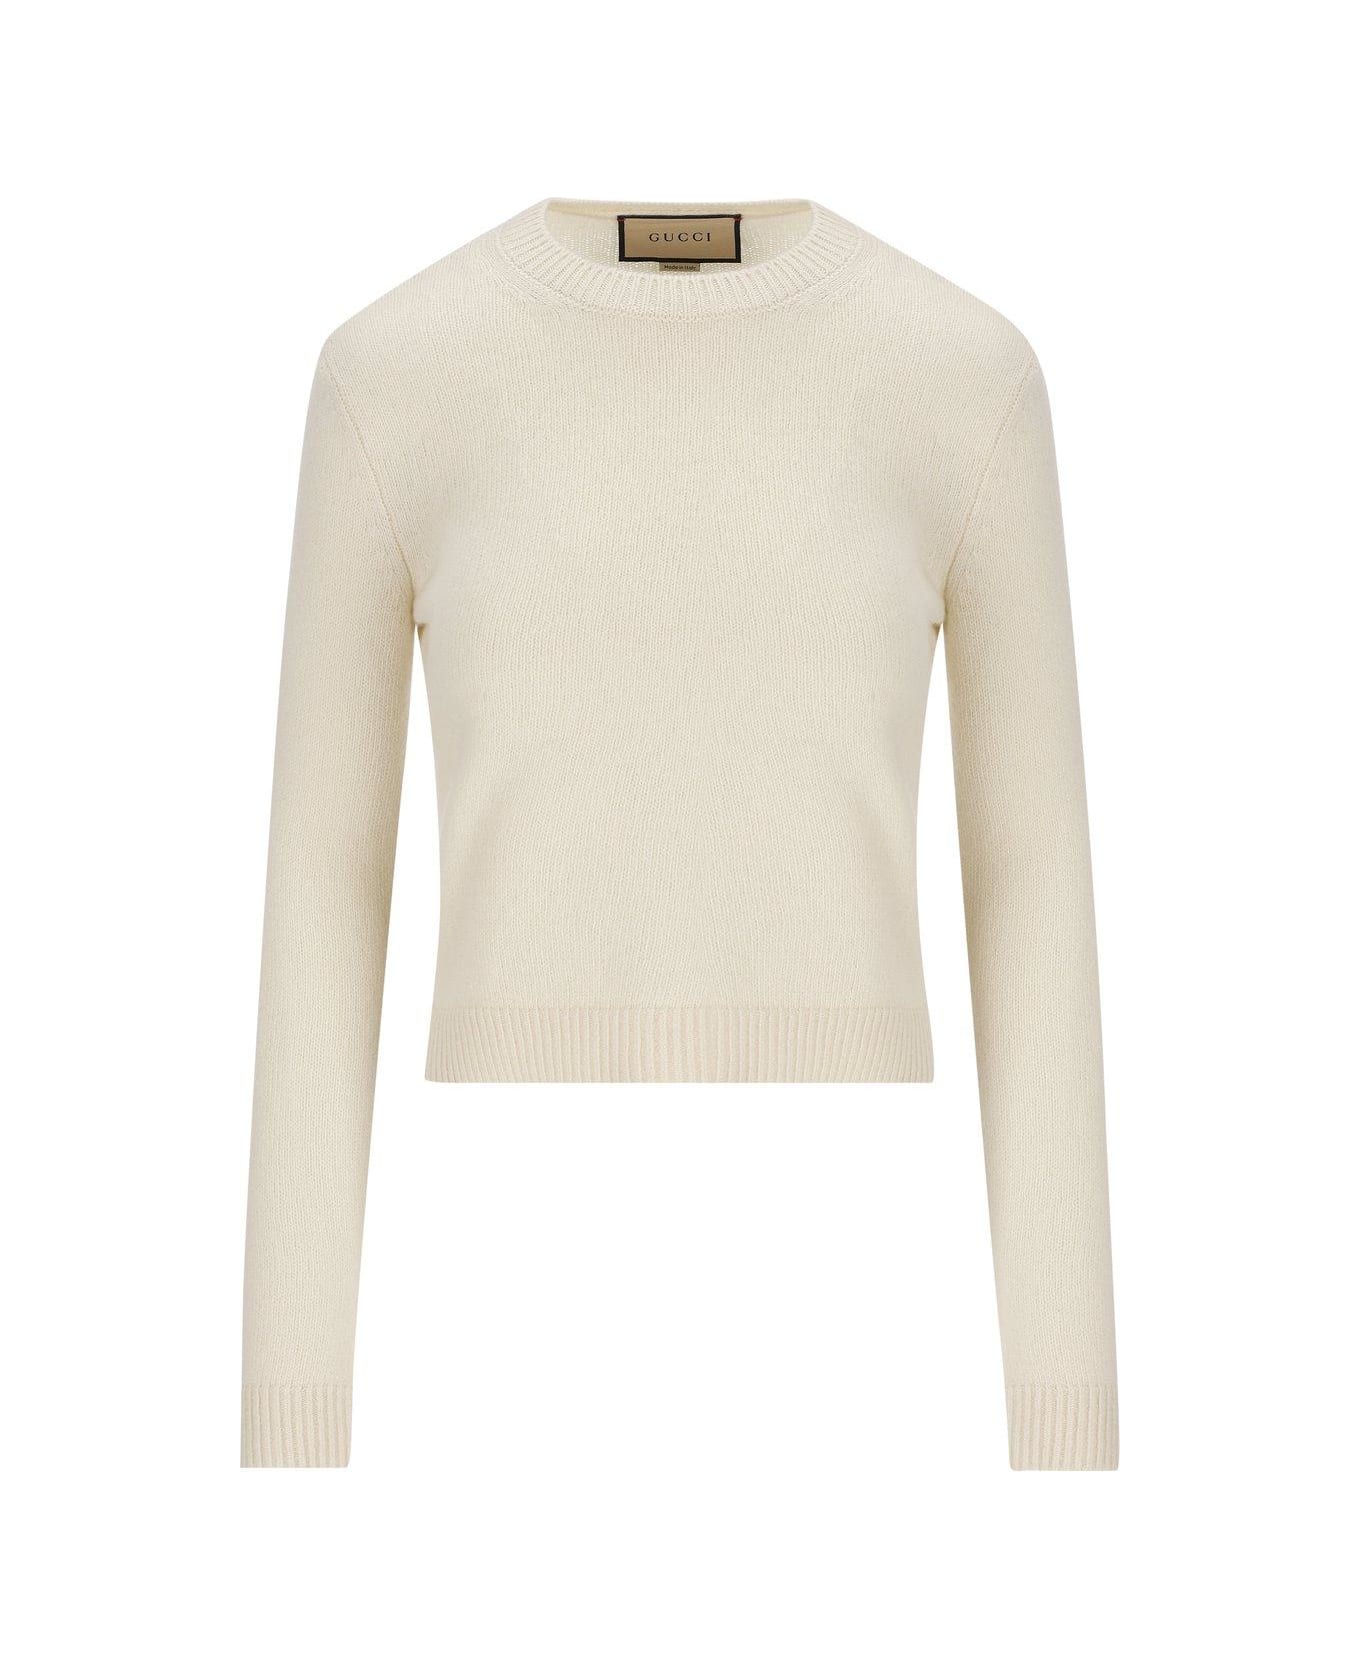 Gucci Long-sleeve Knit Sweater - White